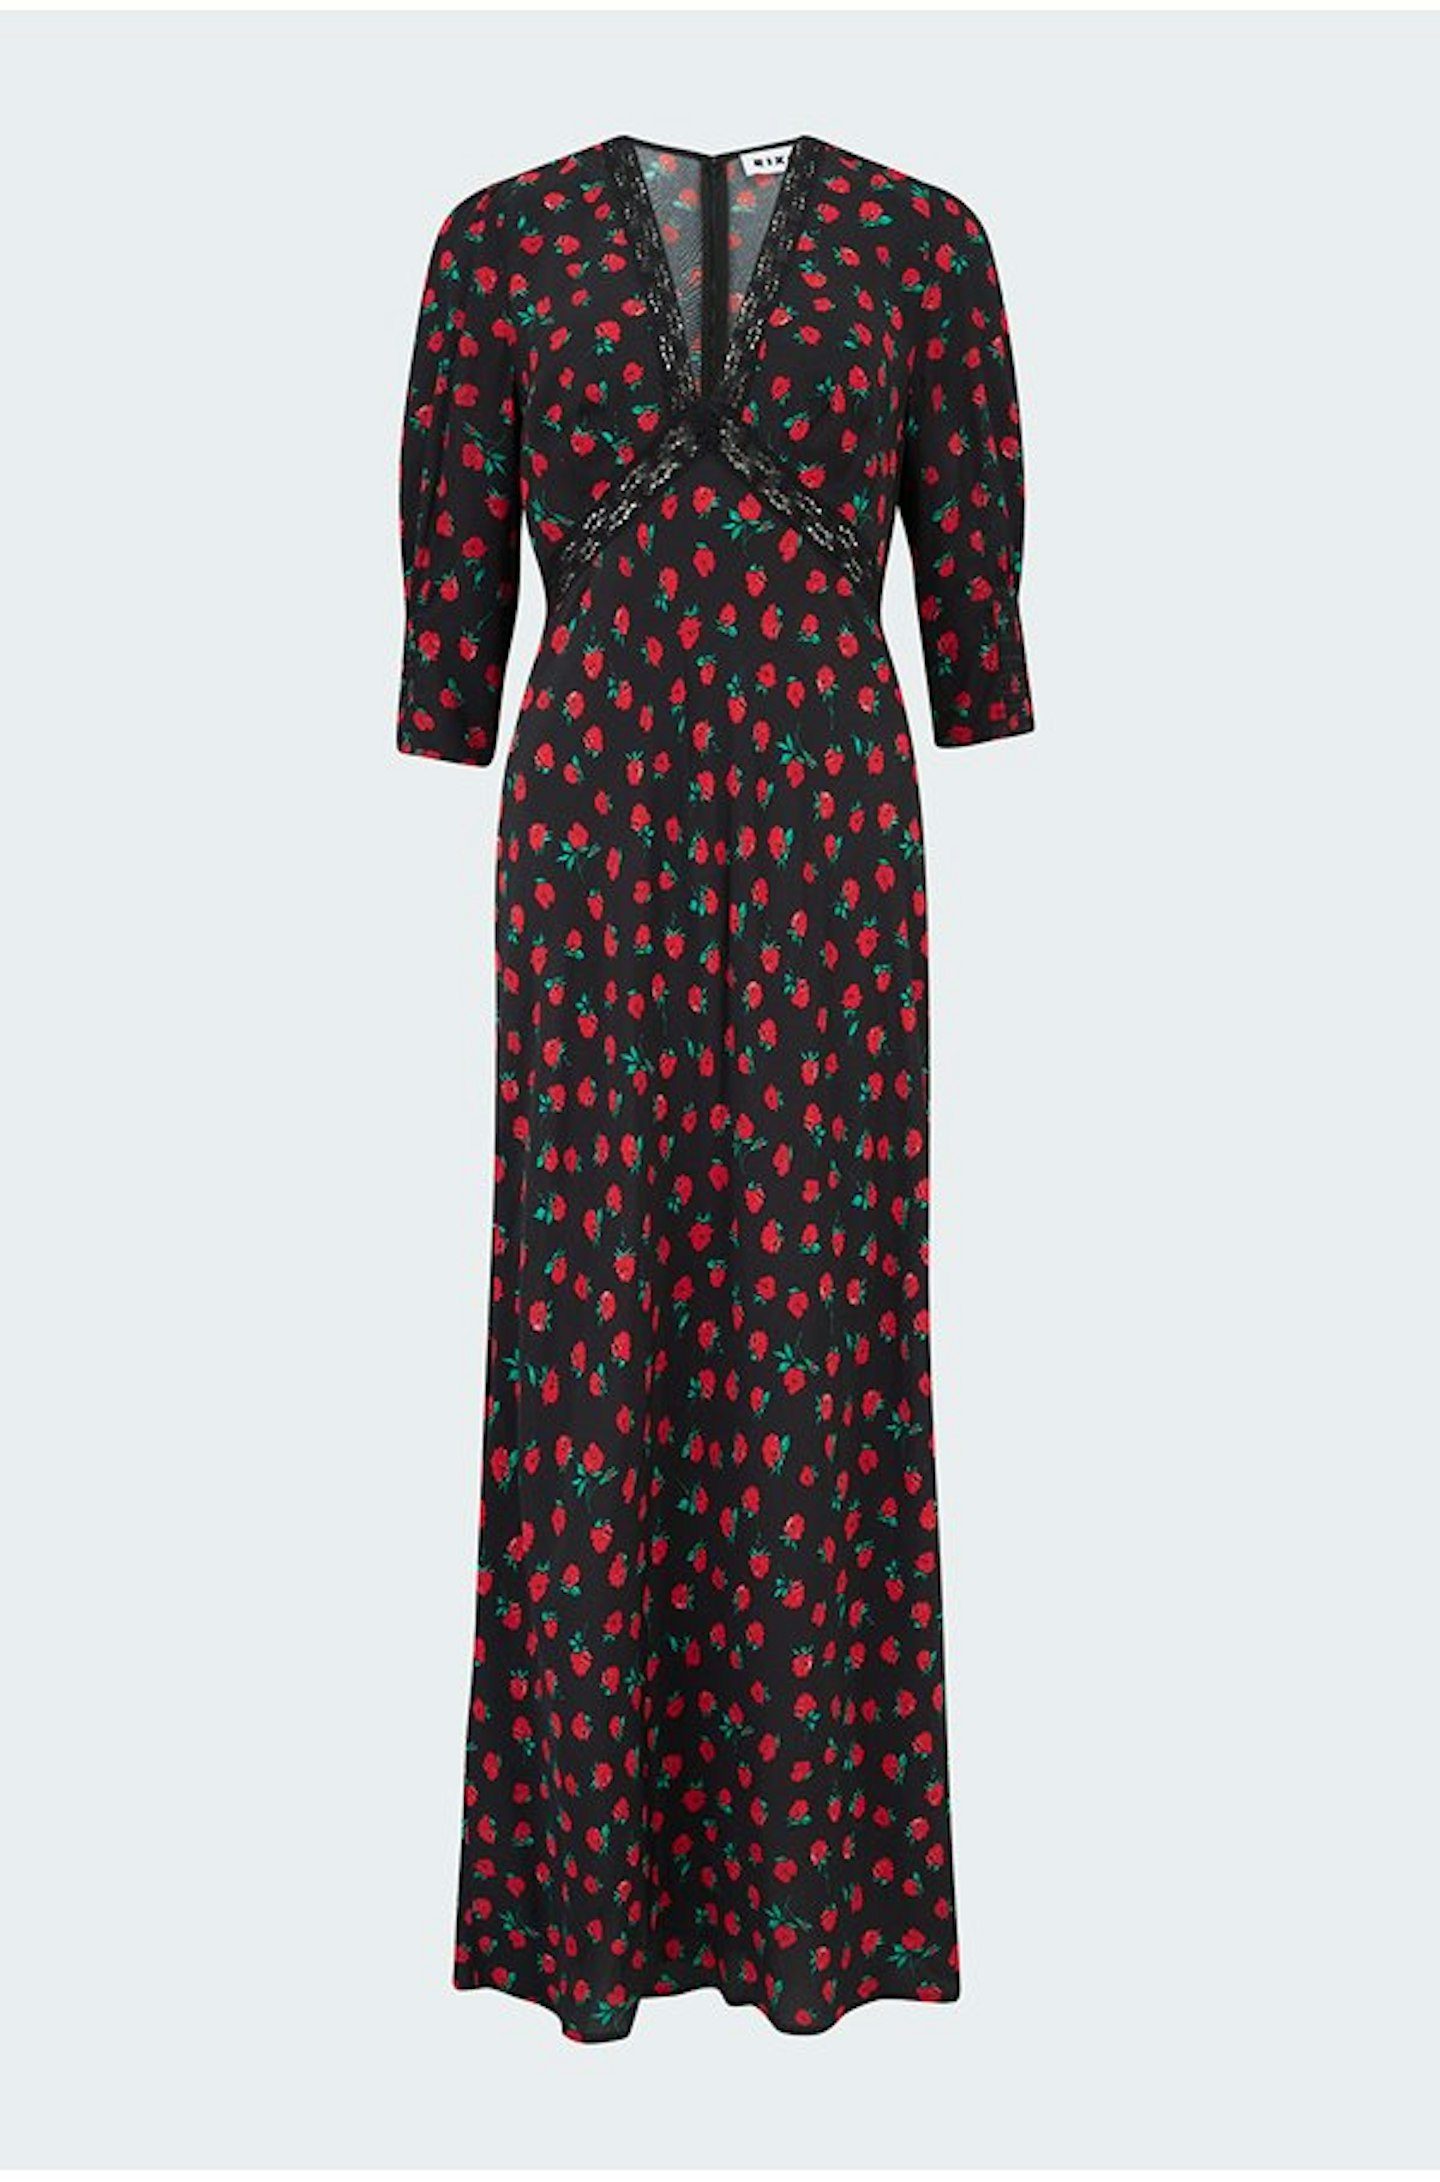 Rixo, Gemma Dress in Vintage Rose Print, WAS £265 NOW £175 at Trilogy